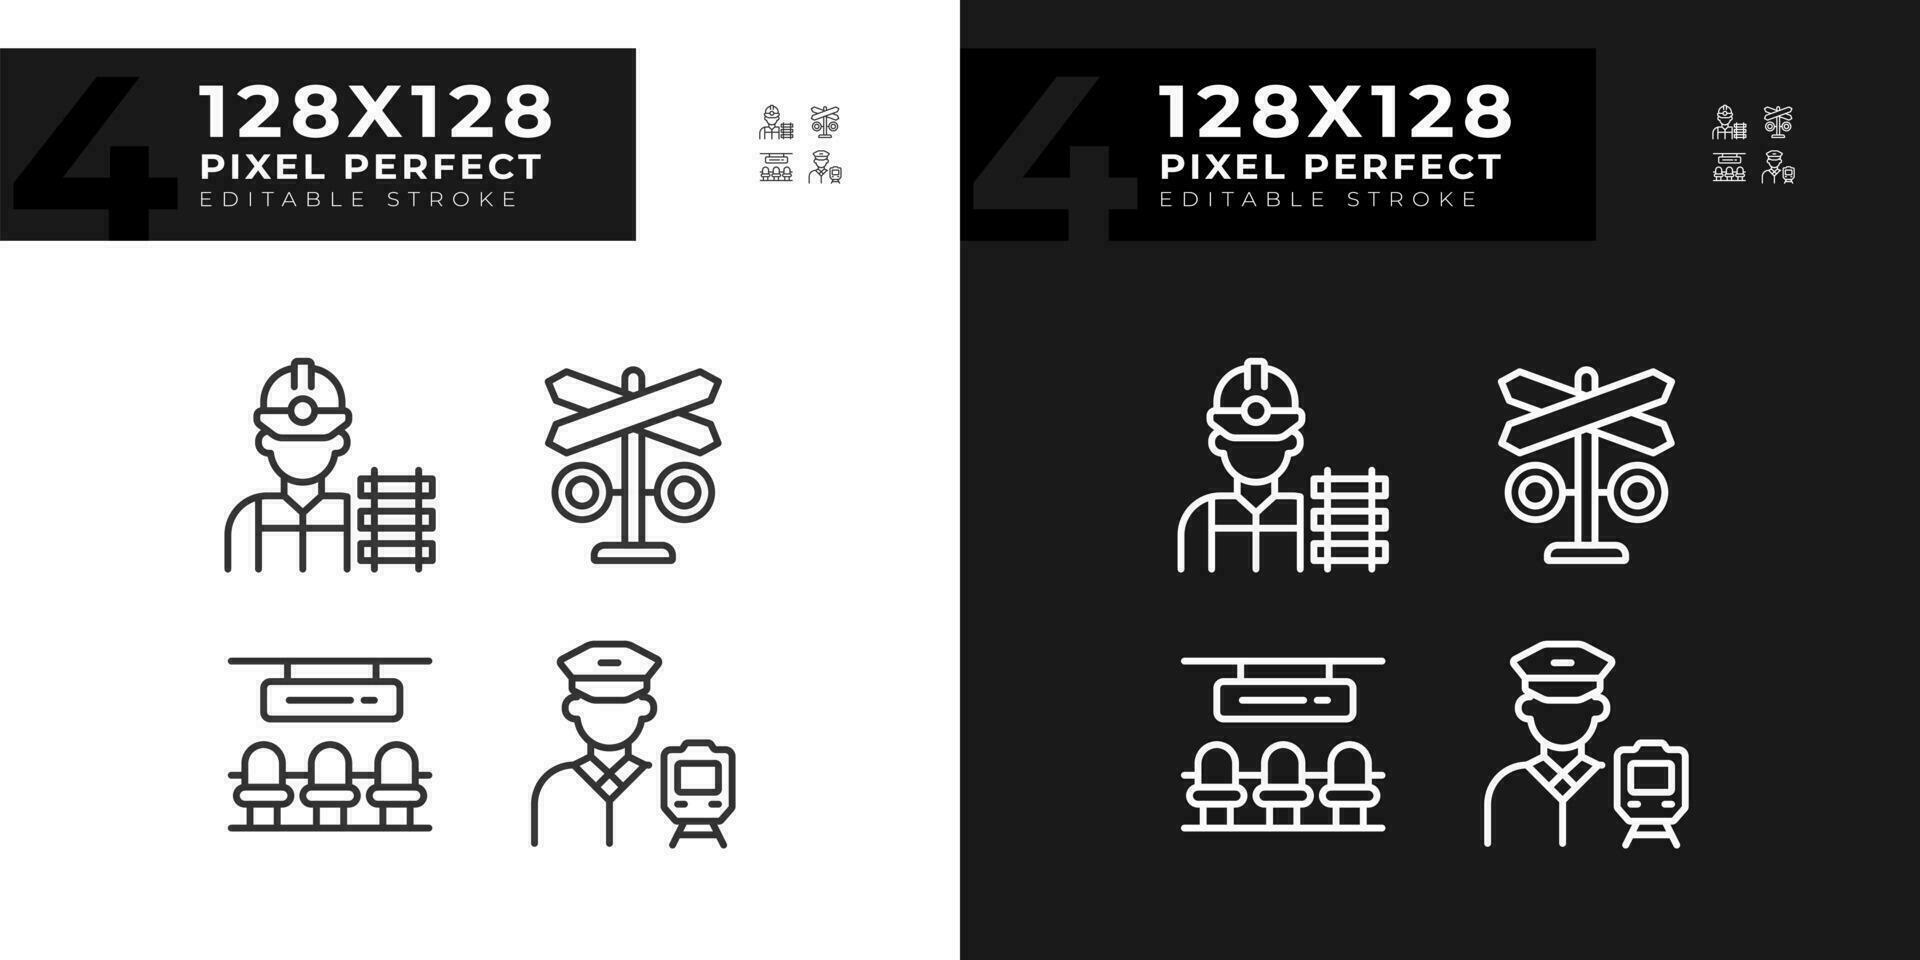 Railroad infrastructure pixel perfect linear icons set for dark, light mode. Public transportation. Railway employment. Thin line symbols for night, day theme. Isolated illustrations. Editable stroke vector